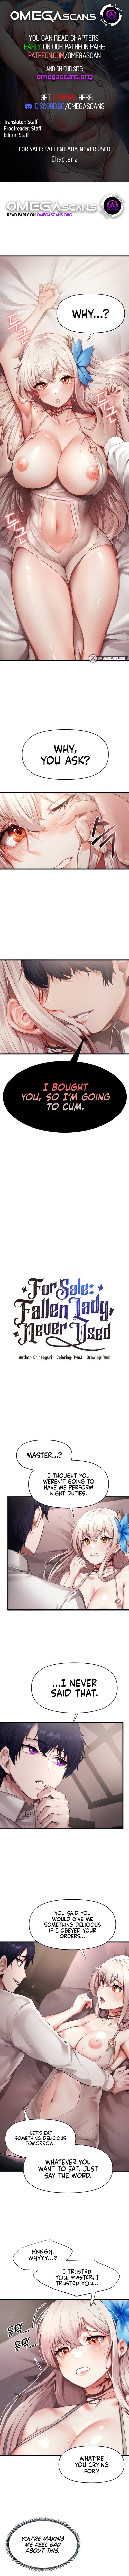 For Sale: Fallen Lady, Never Used Chapter 2 - Page 1